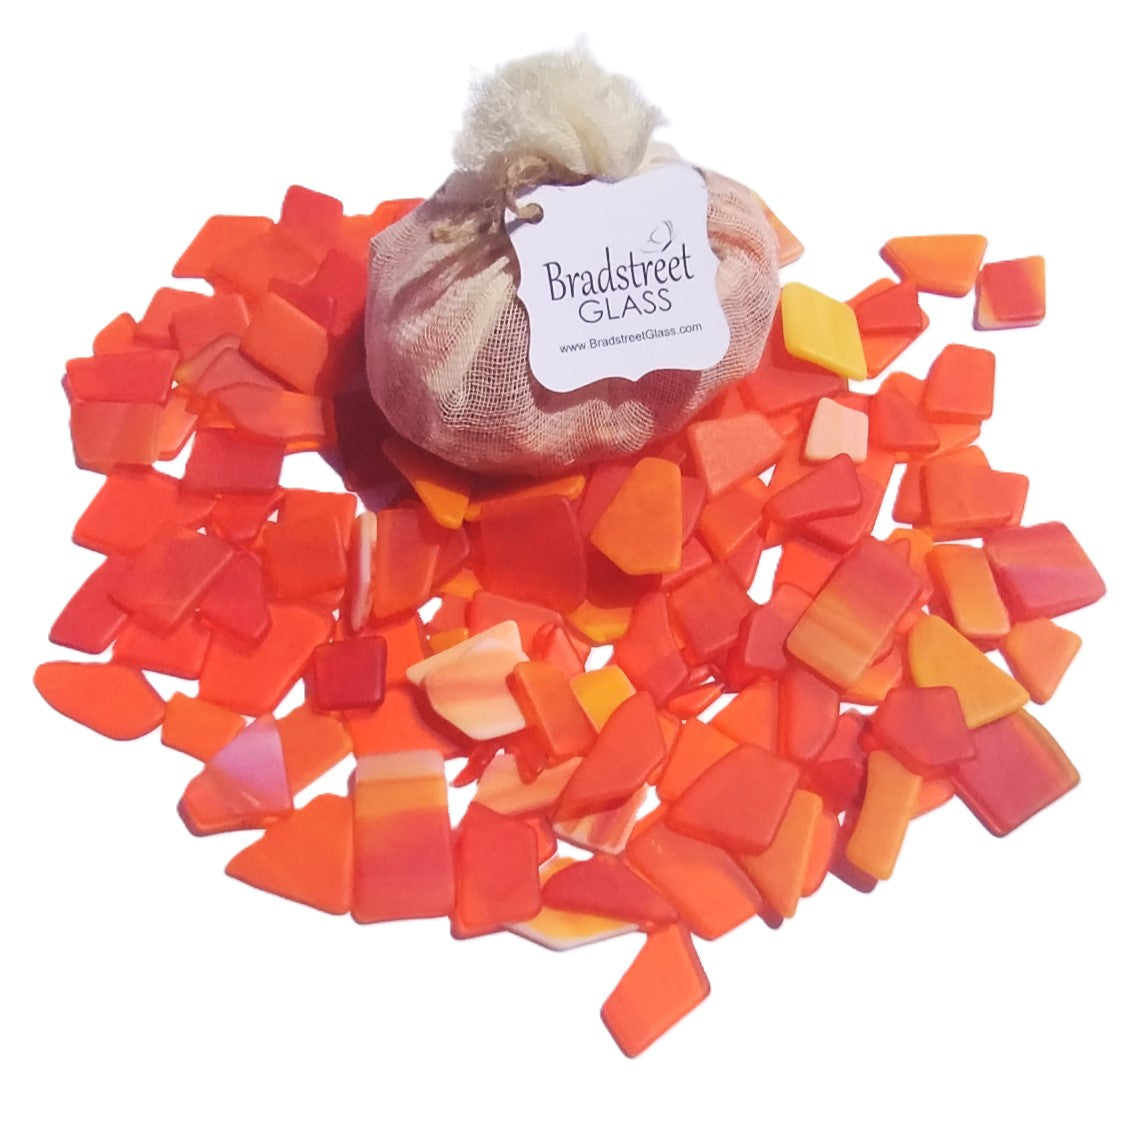 Bradstreet Glass Orange Tumbled Stained Glass 1/2 pound "Sea Glass" in Shades of Orange